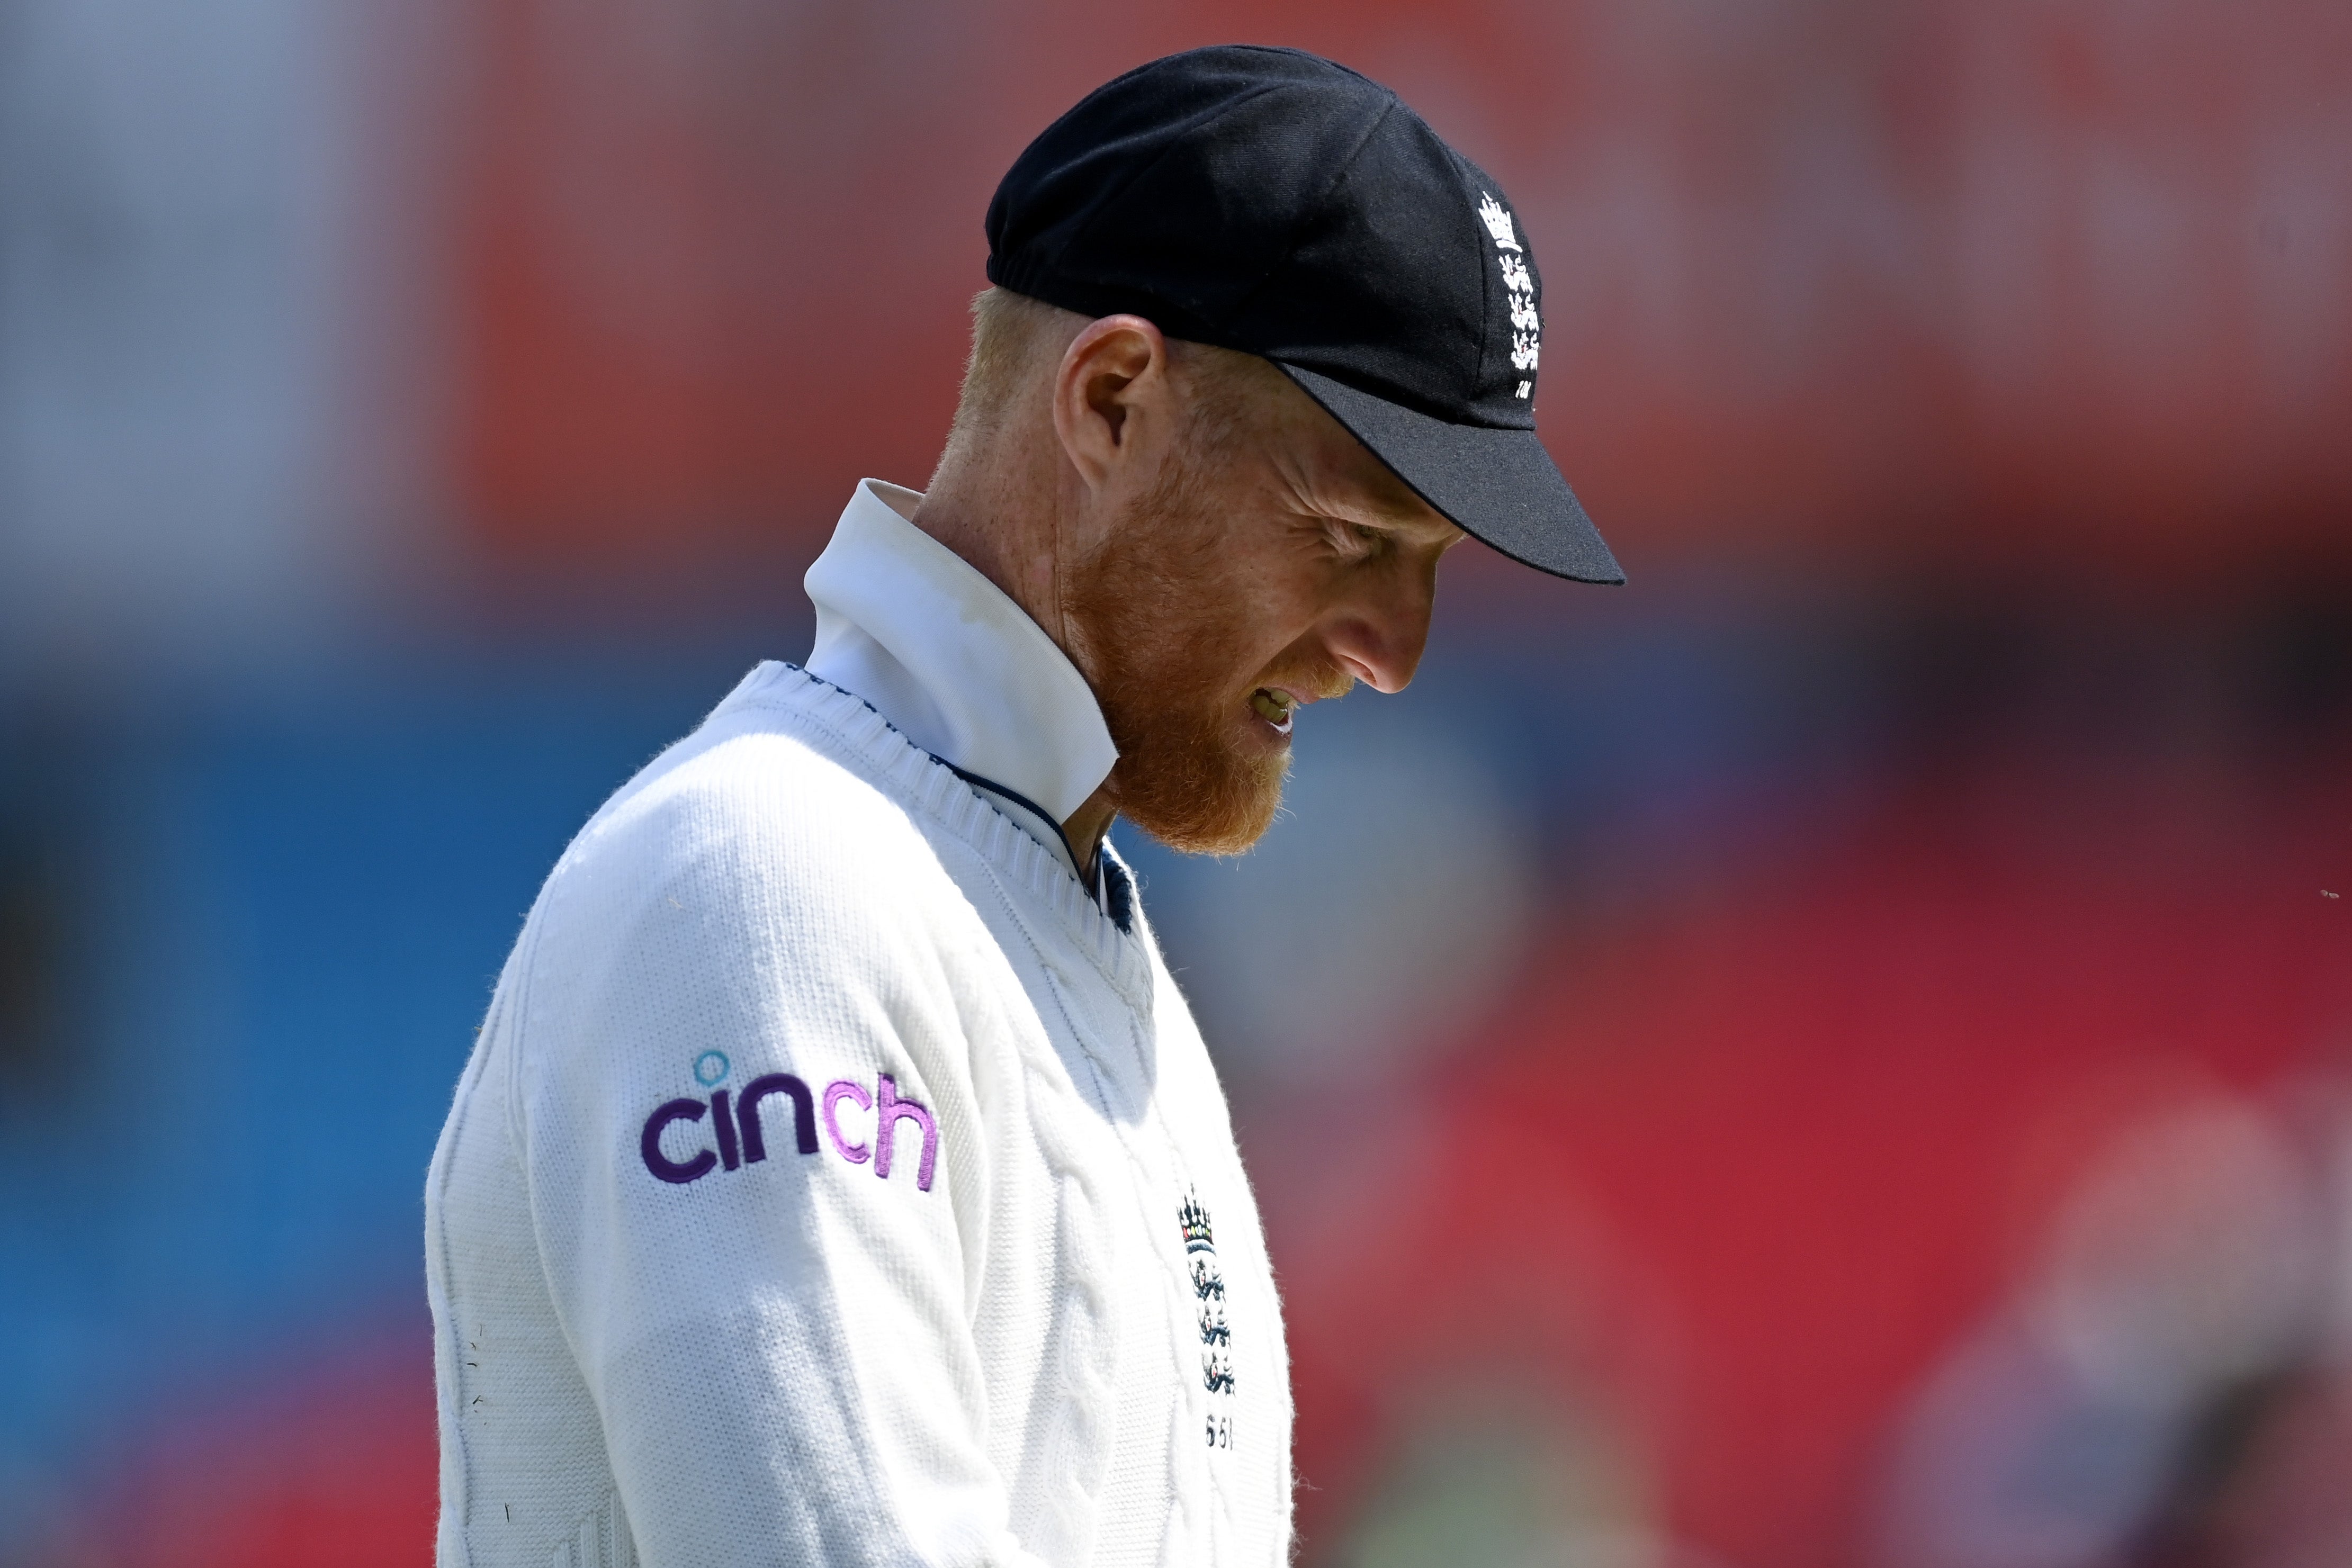 England have slipped to to the bottom of the World Test Championship